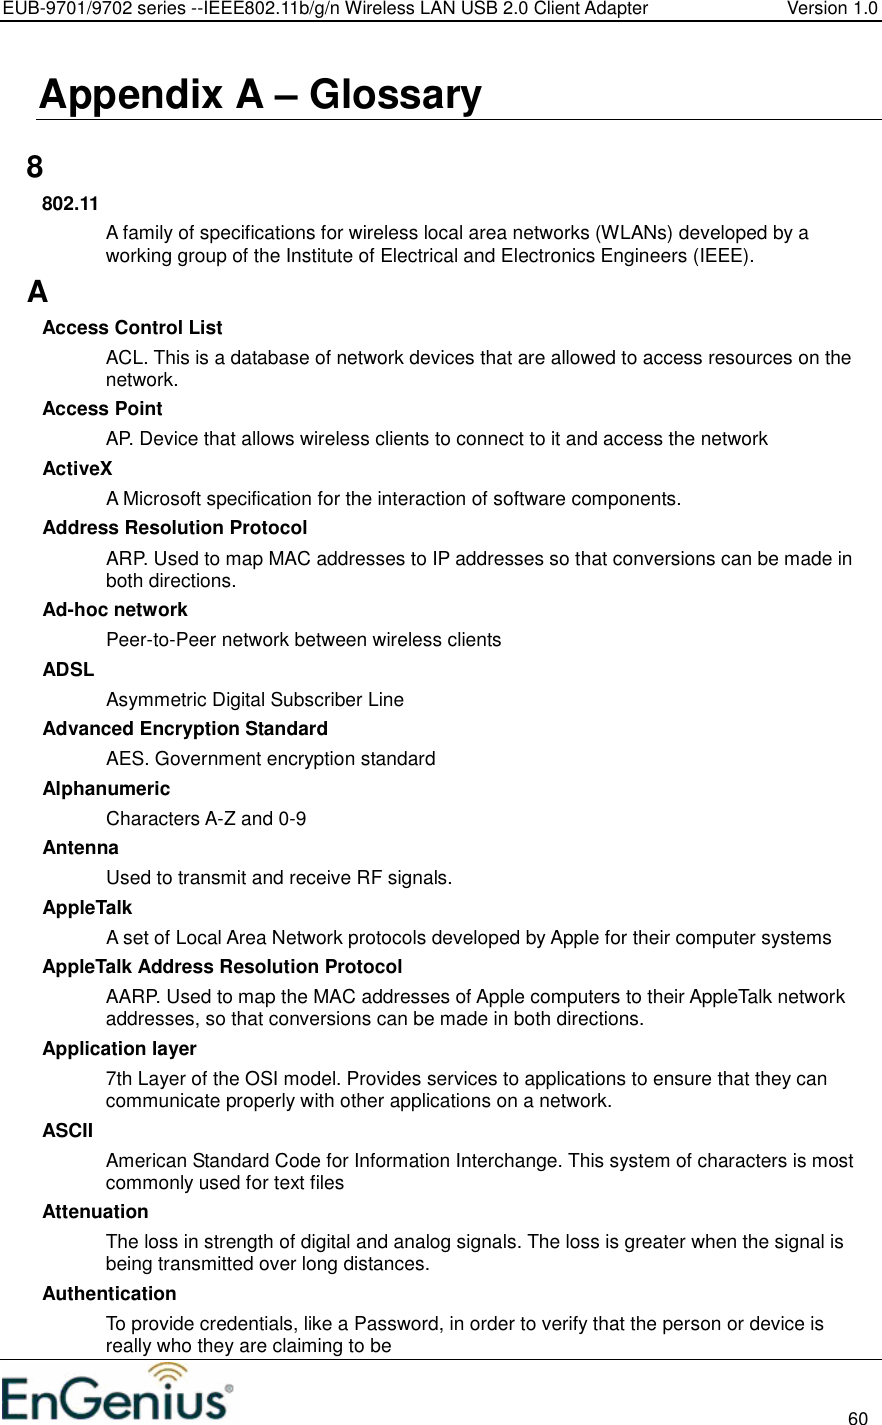 EUB-9701/9702 series --IEEE802.11b/g/n Wireless LAN USB 2.0 Client Adapter  Version 1.0                                                                                                                          60  Appendix A – Glossary   8 802.11 A family of specifications for wireless local area networks (WLANs) developed by a working group of the Institute of Electrical and Electronics Engineers (IEEE).  A Access Control List ACL. This is a database of network devices that are allowed to access resources on the network. Access Point AP. Device that allows wireless clients to connect to it and access the network ActiveX A Microsoft specification for the interaction of software components.  Address Resolution Protocol ARP. Used to map MAC addresses to IP addresses so that conversions can be made in both directions. Ad-hoc network Peer-to-Peer network between wireless clients ADSL Asymmetric Digital Subscriber Line Advanced Encryption Standard AES. Government encryption standard Alphanumeric Characters A-Z and 0-9 Antenna Used to transmit and receive RF signals. AppleTalk A set of Local Area Network protocols developed by Apple for their computer systems AppleTalk Address Resolution Protocol AARP. Used to map the MAC addresses of Apple computers to their AppleTalk network addresses, so that conversions can be made in both directions. Application layer 7th Layer of the OSI model. Provides services to applications to ensure that they can communicate properly with other applications on a network. ASCII American Standard Code for Information Interchange. This system of characters is most commonly used for text files Attenuation The loss in strength of digital and analog signals. The loss is greater when the signal is being transmitted over long distances. Authentication To provide credentials, like a Password, in order to verify that the person or device is really who they are claiming to be 